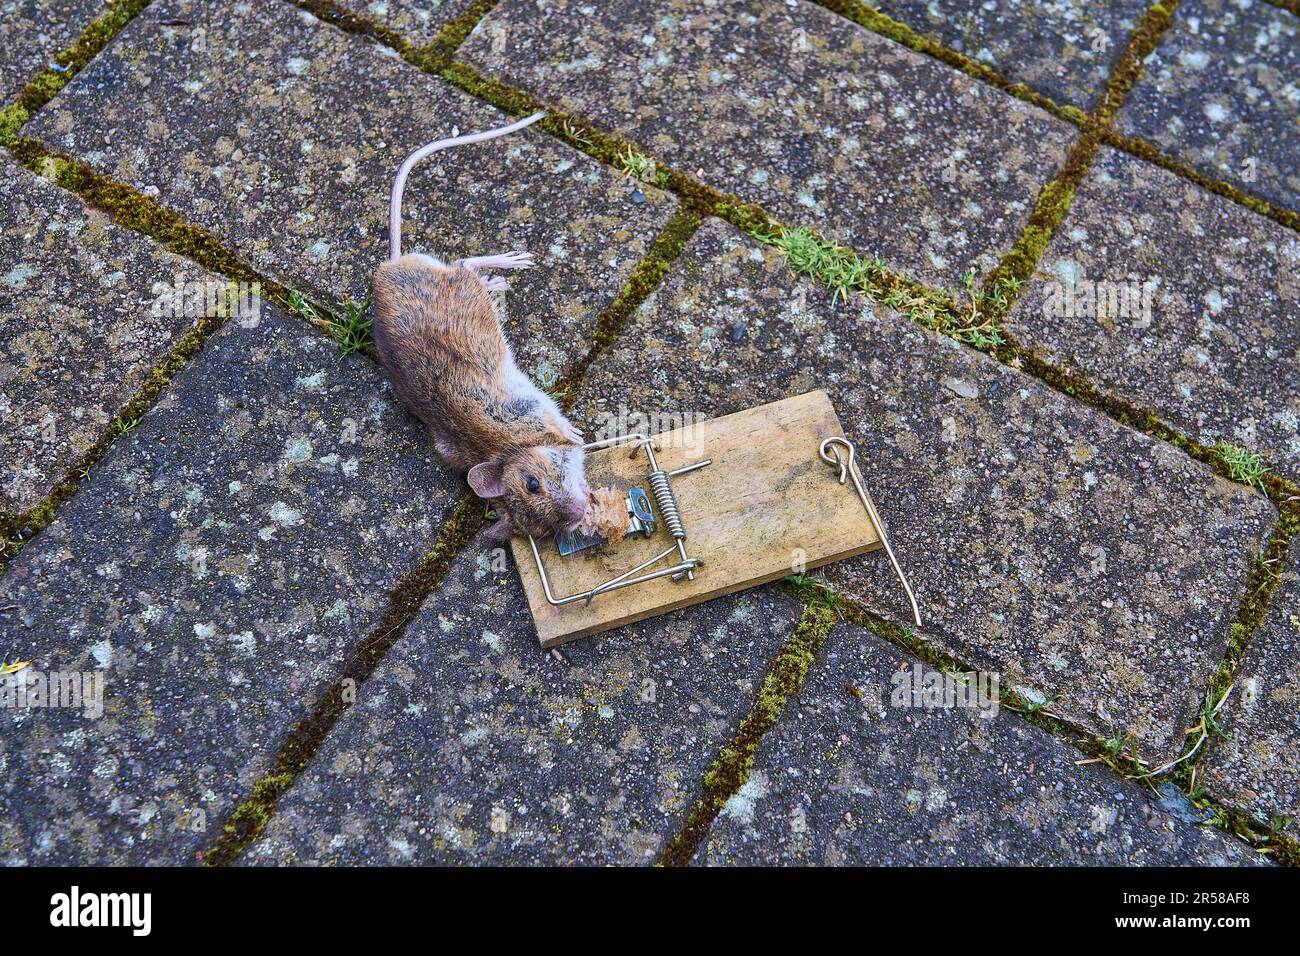 Mouse killed in a metal mouse trap Stock Photo - Alamy